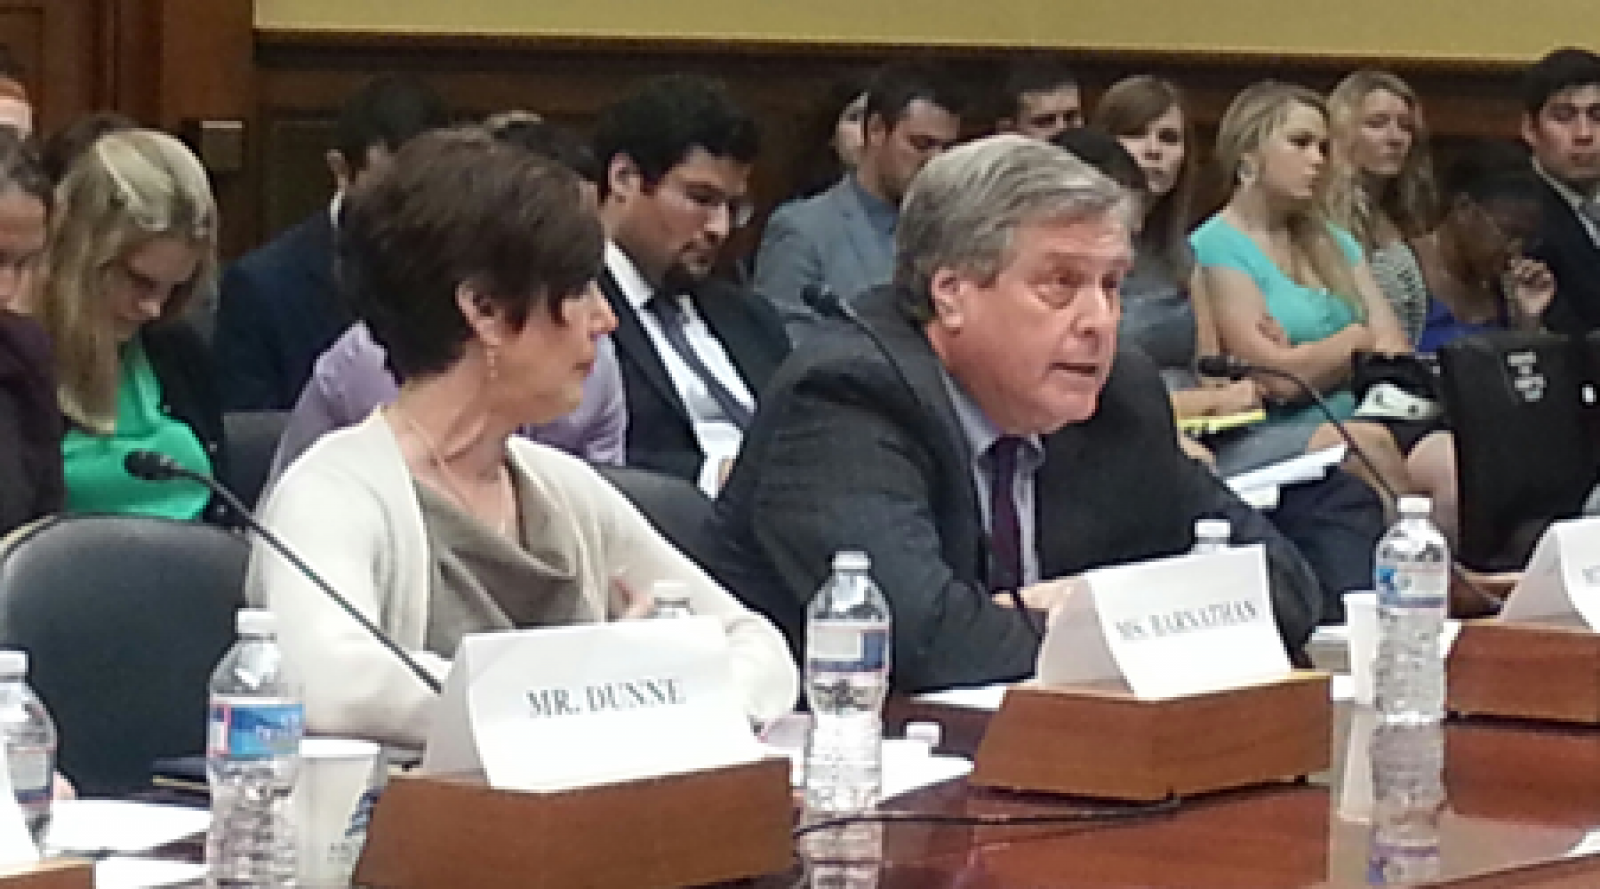 NDI President Testifies Before Congress: Egypt's Actions 'Not Influenced by Facts or Law'